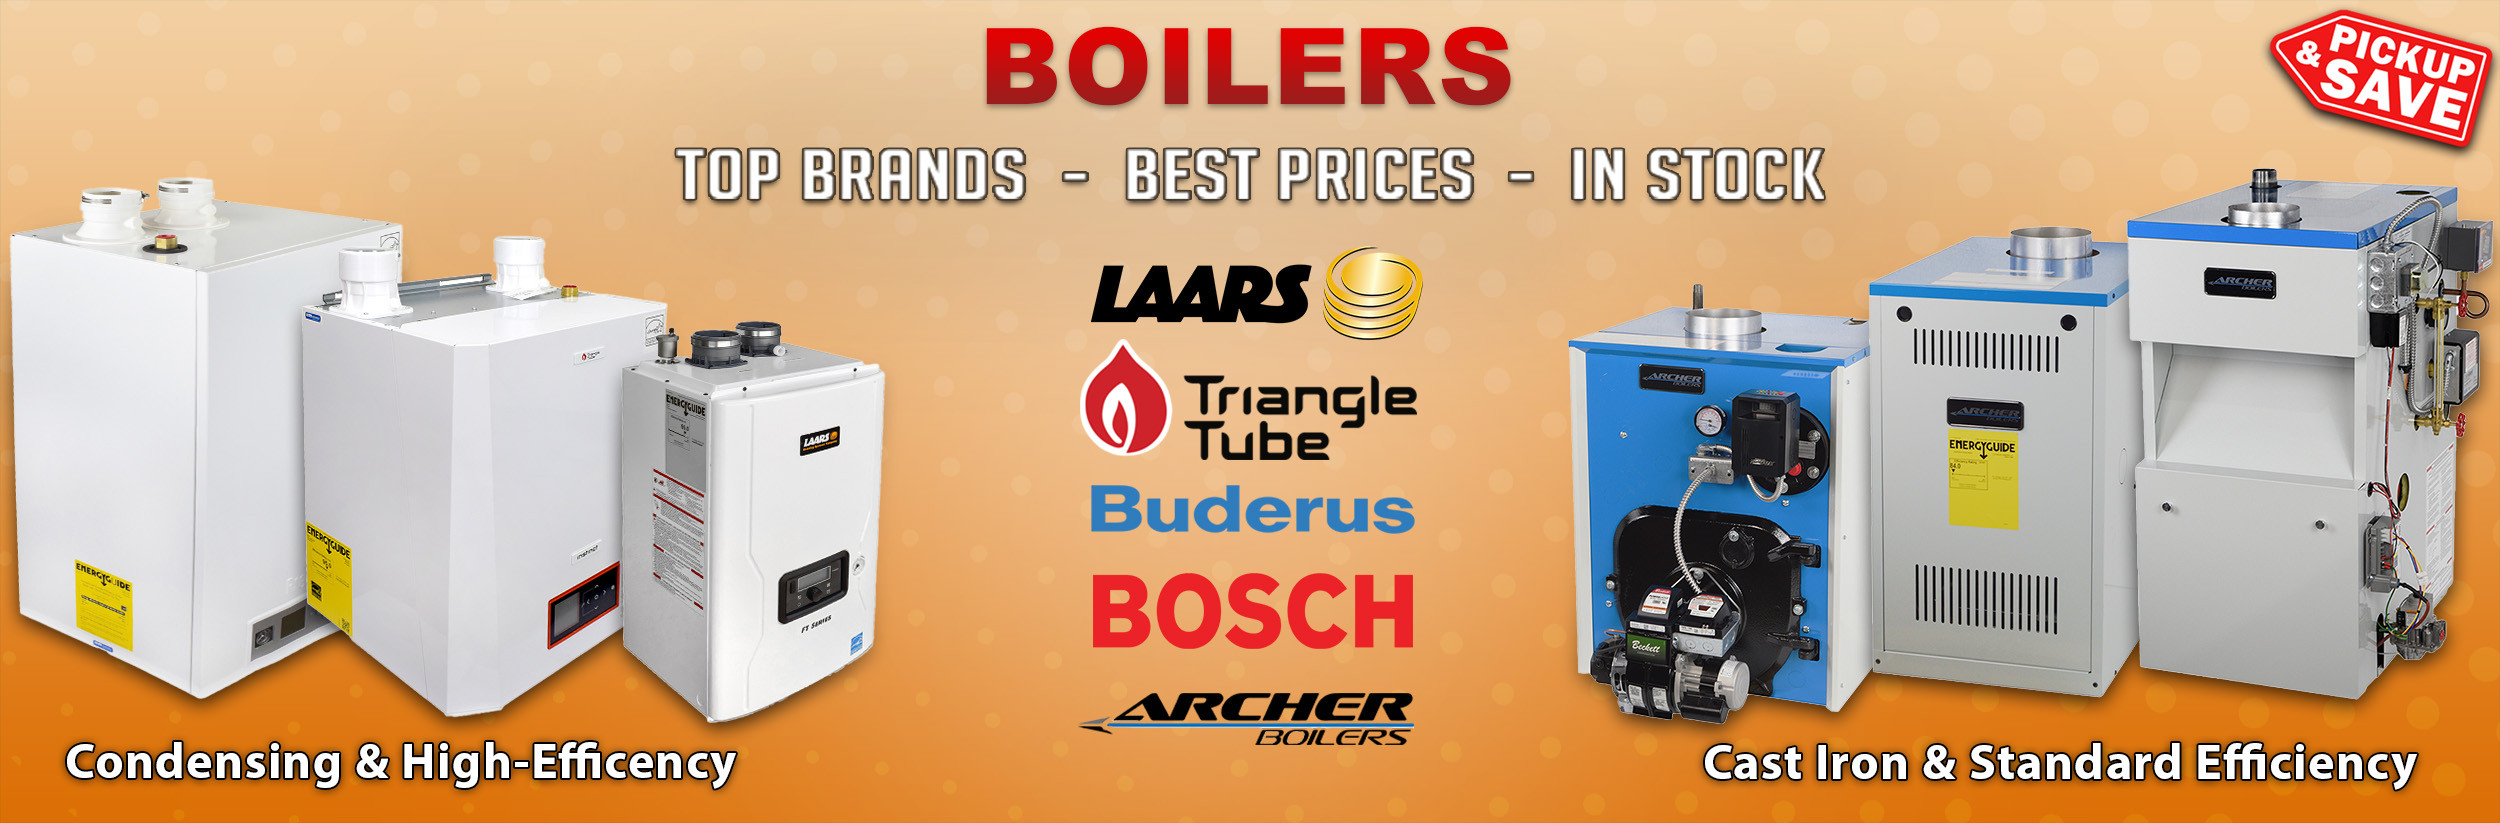 Hot Water Gas and Steam Boilers - High Efficiency and Cast Iron